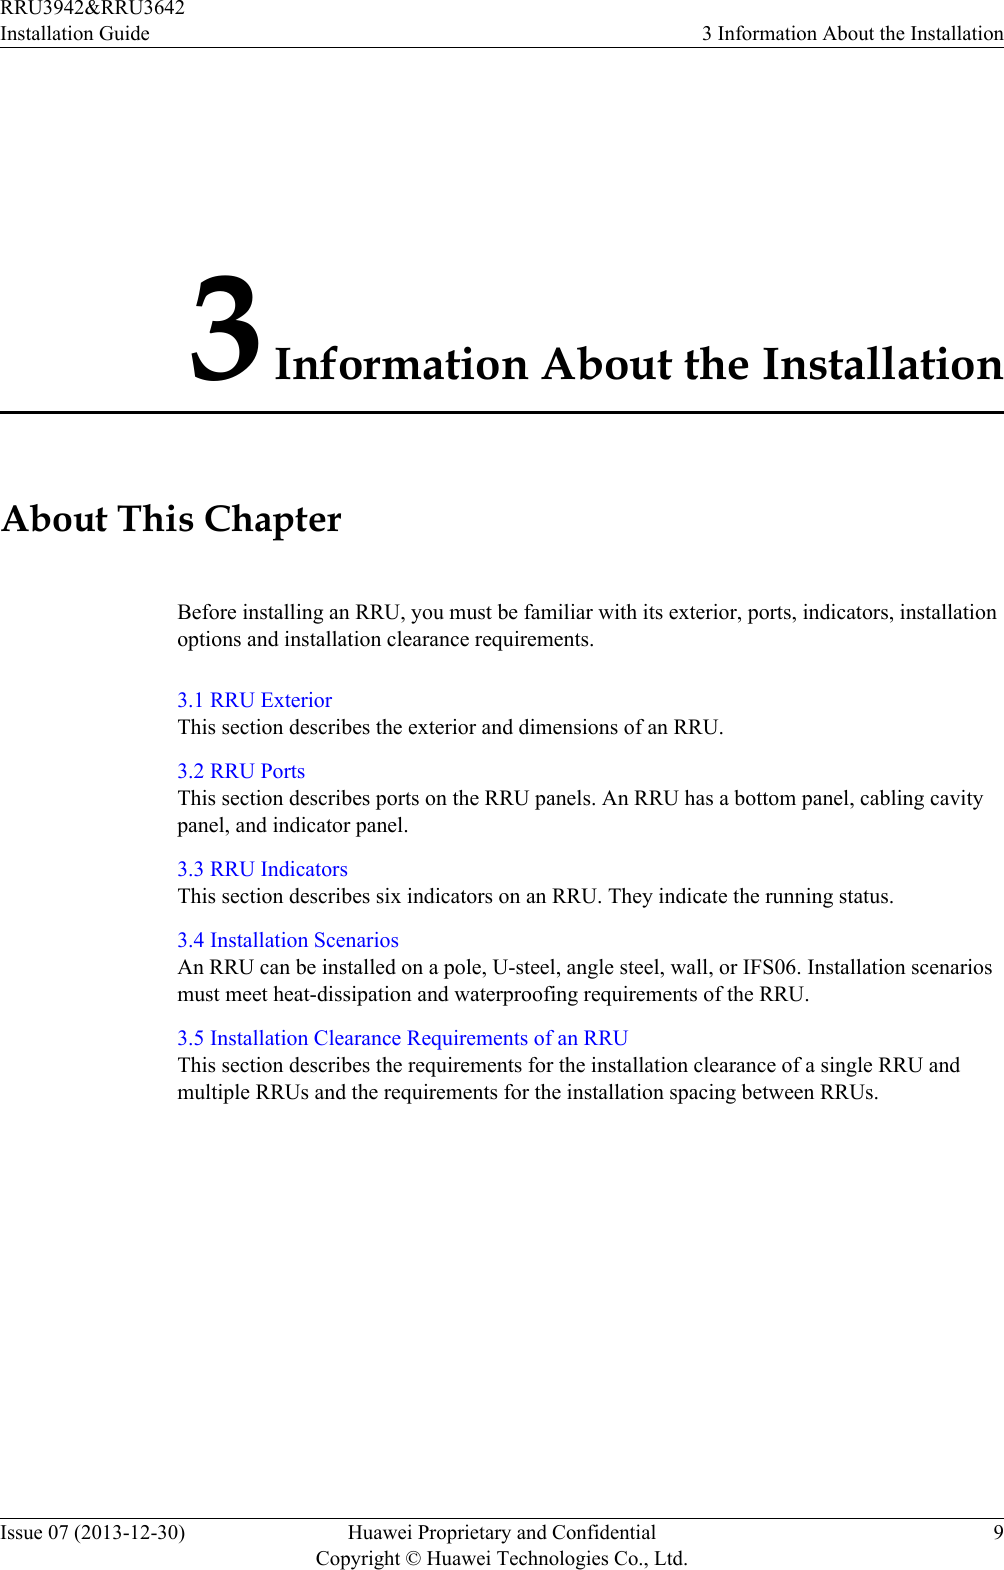 3 Information About the InstallationAbout This ChapterBefore installing an RRU, you must be familiar with its exterior, ports, indicators, installationoptions and installation clearance requirements.3.1 RRU ExteriorThis section describes the exterior and dimensions of an RRU.3.2 RRU PortsThis section describes ports on the RRU panels. An RRU has a bottom panel, cabling cavitypanel, and indicator panel.3.3 RRU IndicatorsThis section describes six indicators on an RRU. They indicate the running status.3.4 Installation ScenariosAn RRU can be installed on a pole, U-steel, angle steel, wall, or IFS06. Installation scenariosmust meet heat-dissipation and waterproofing requirements of the RRU.3.5 Installation Clearance Requirements of an RRUThis section describes the requirements for the installation clearance of a single RRU andmultiple RRUs and the requirements for the installation spacing between RRUs.RRU3942&amp;RRU3642Installation Guide 3 Information About the InstallationIssue 07 (2013-12-30) Huawei Proprietary and ConfidentialCopyright © Huawei Technologies Co., Ltd.9